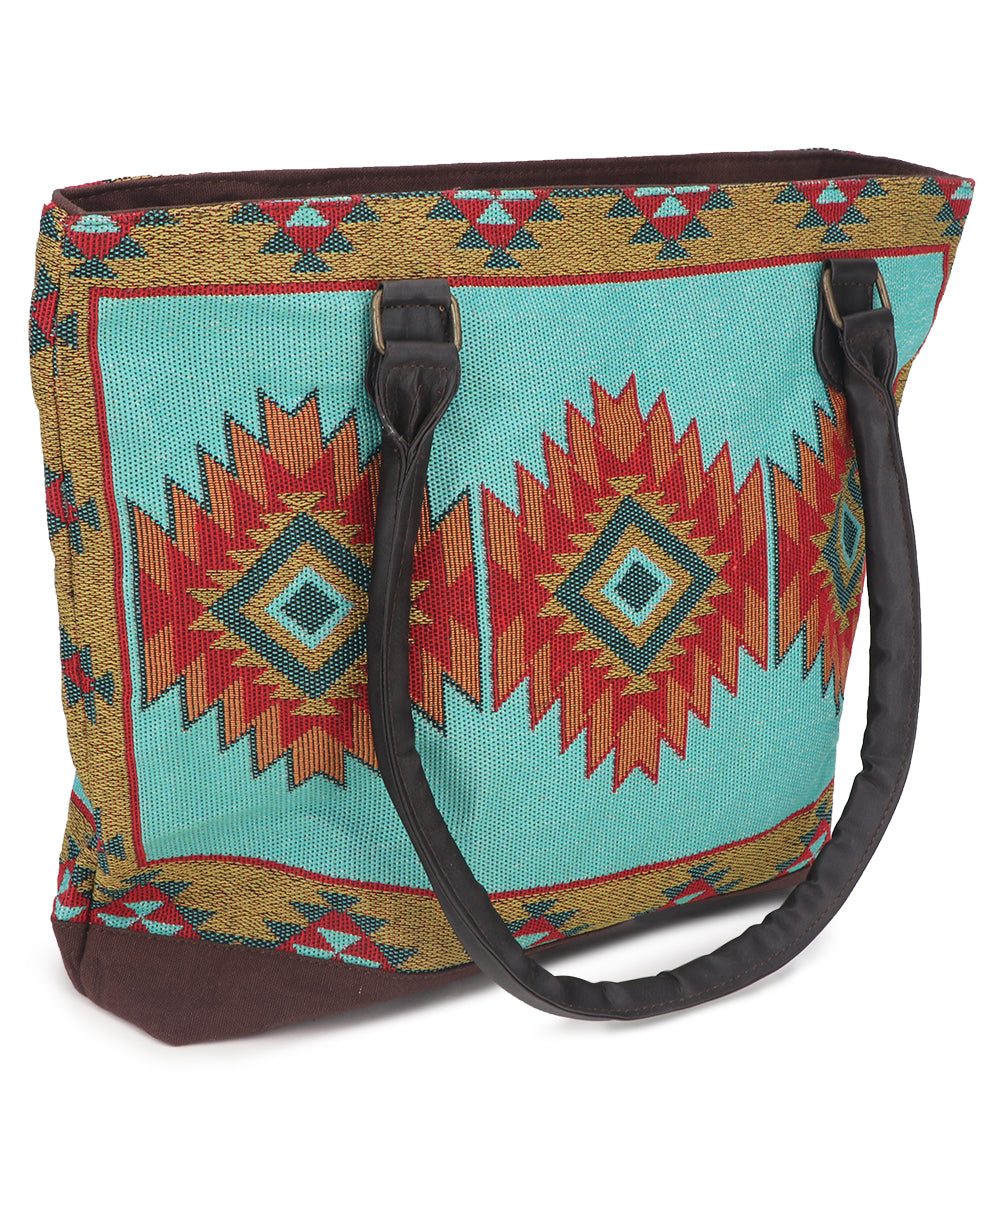 Tribal Tapestry Woven Textile Shoulder Bag with Native Designs